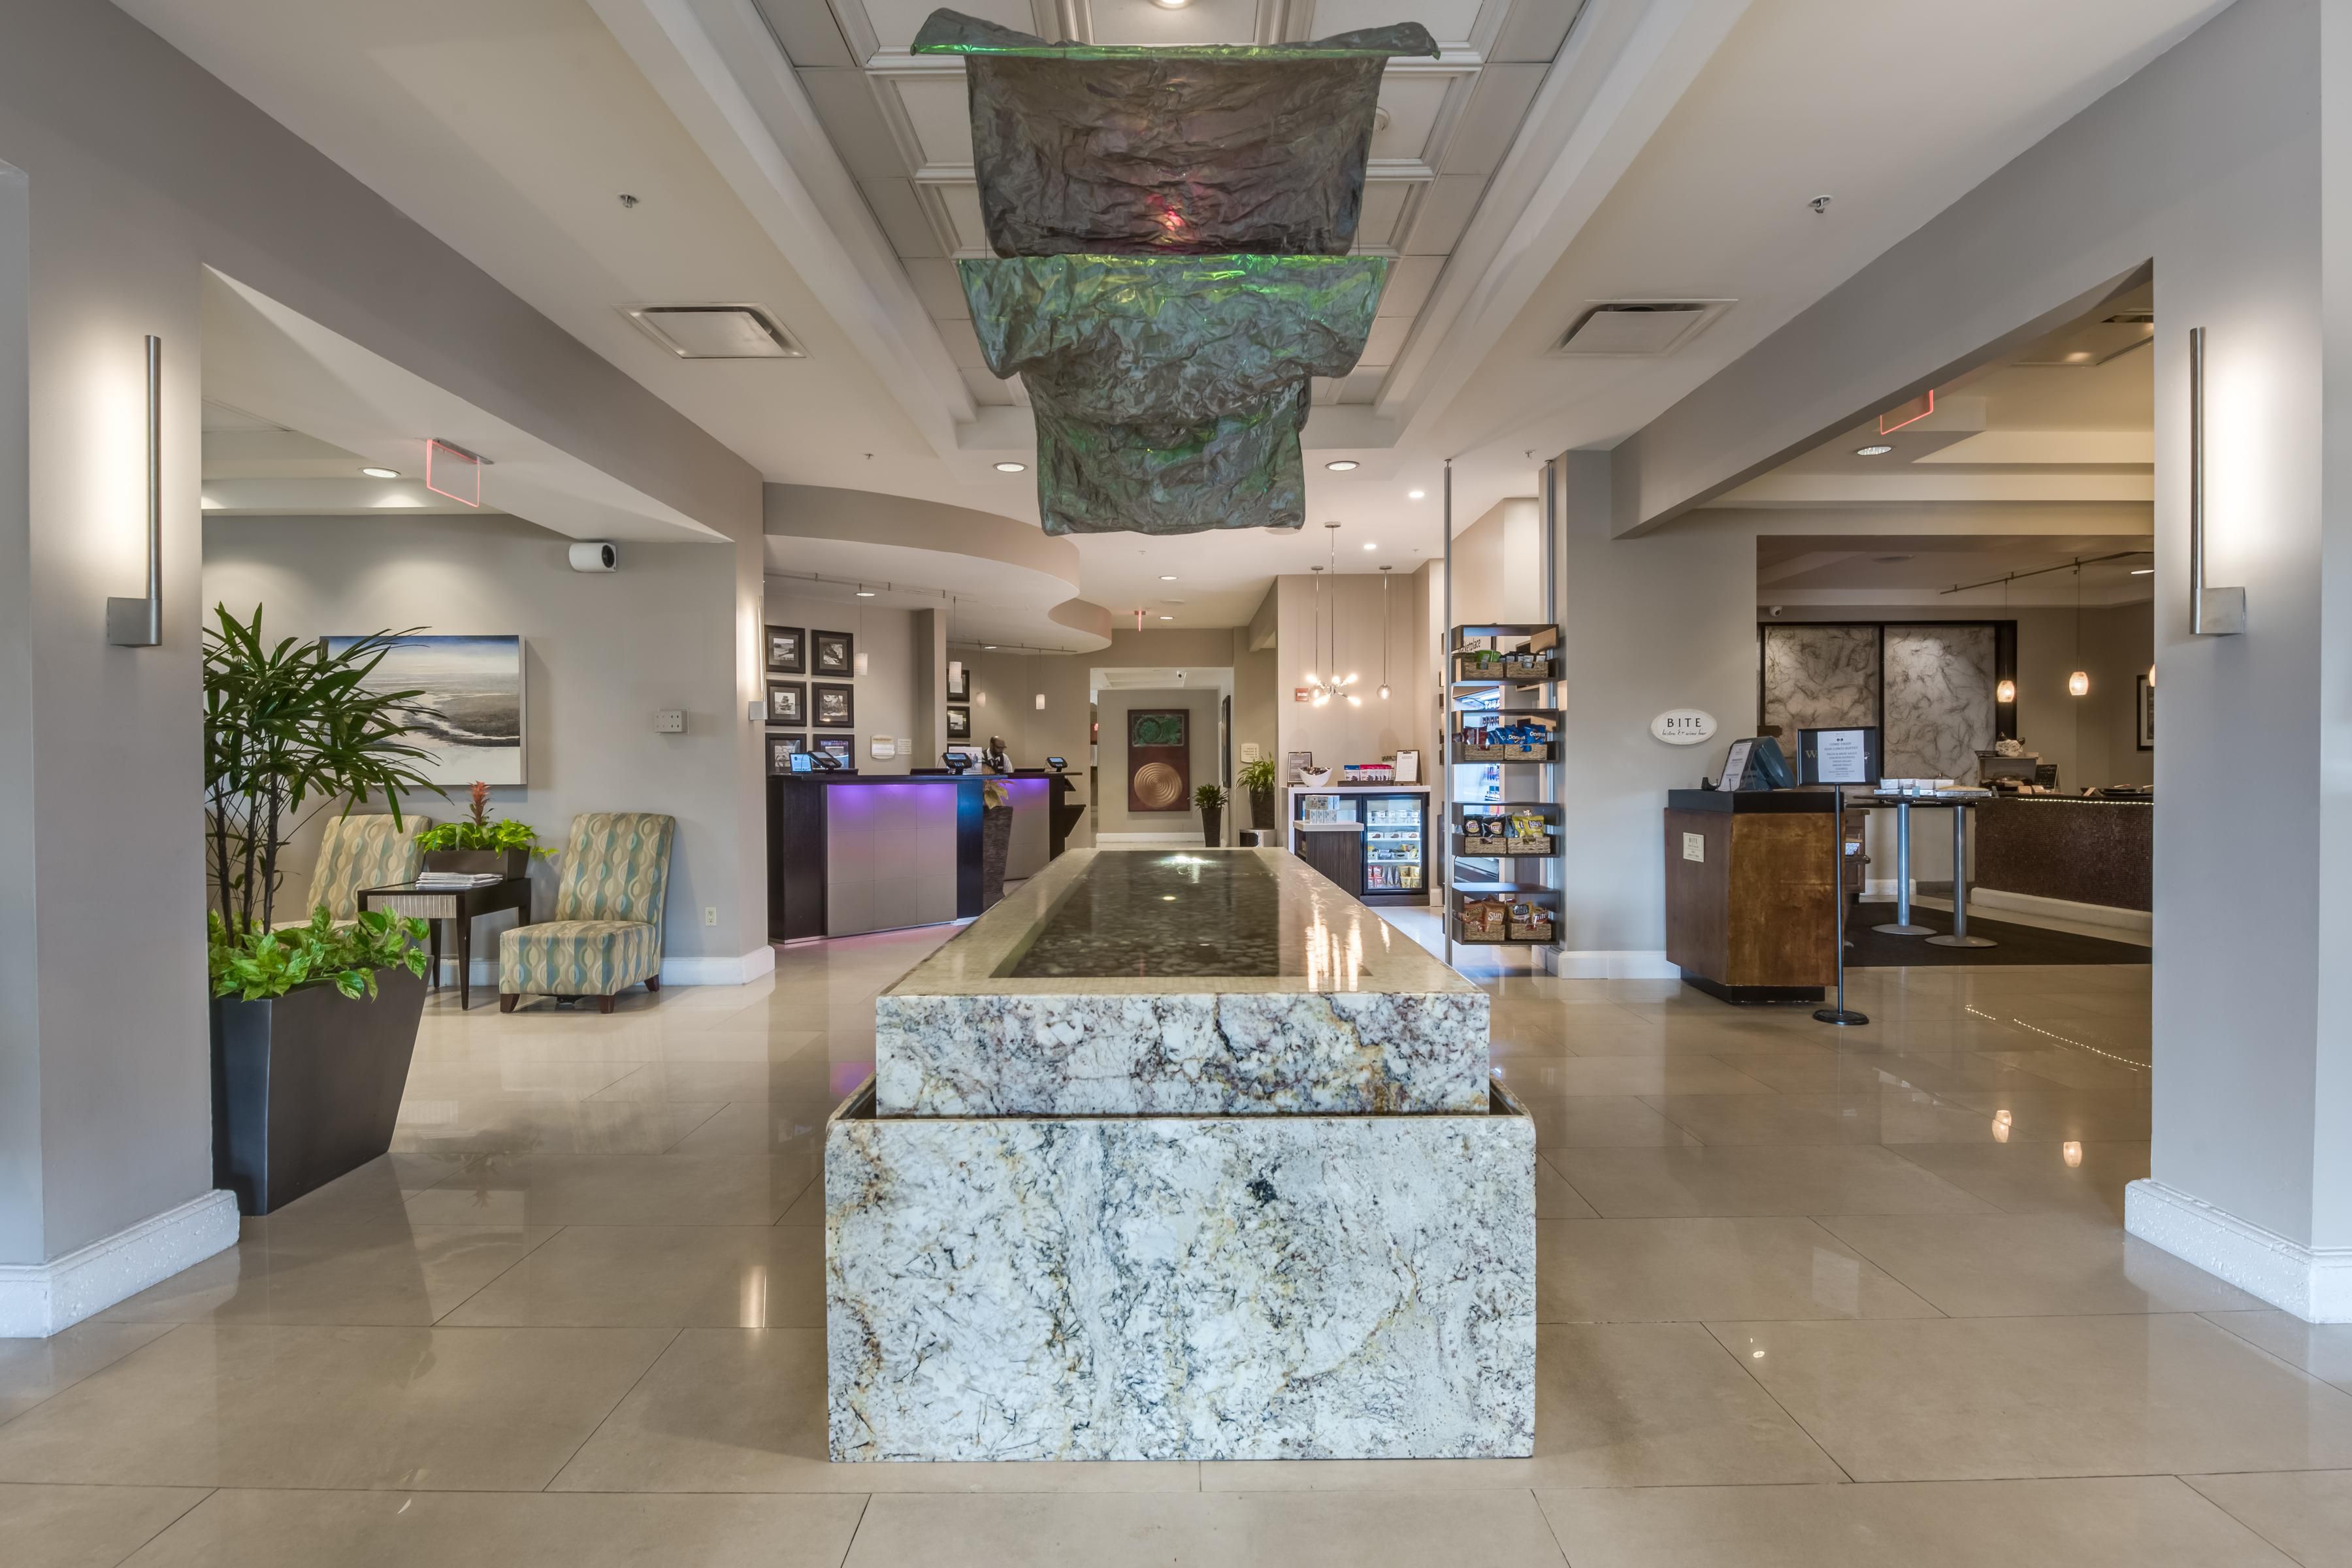 A grand welcome to you when you arrive in our lobby